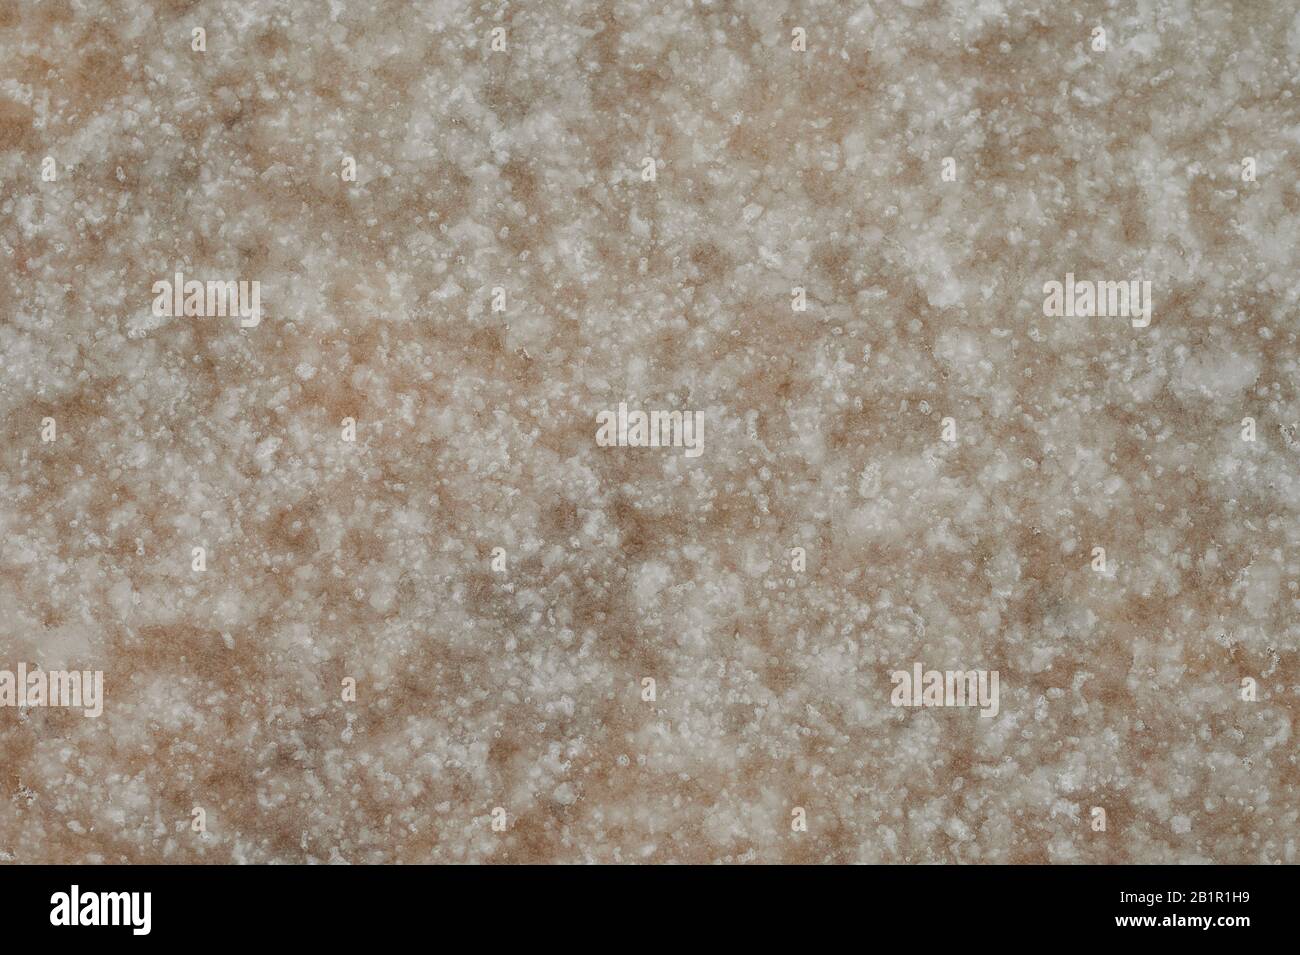 Melting icy surface background. Texture of wet snow Stock Photo